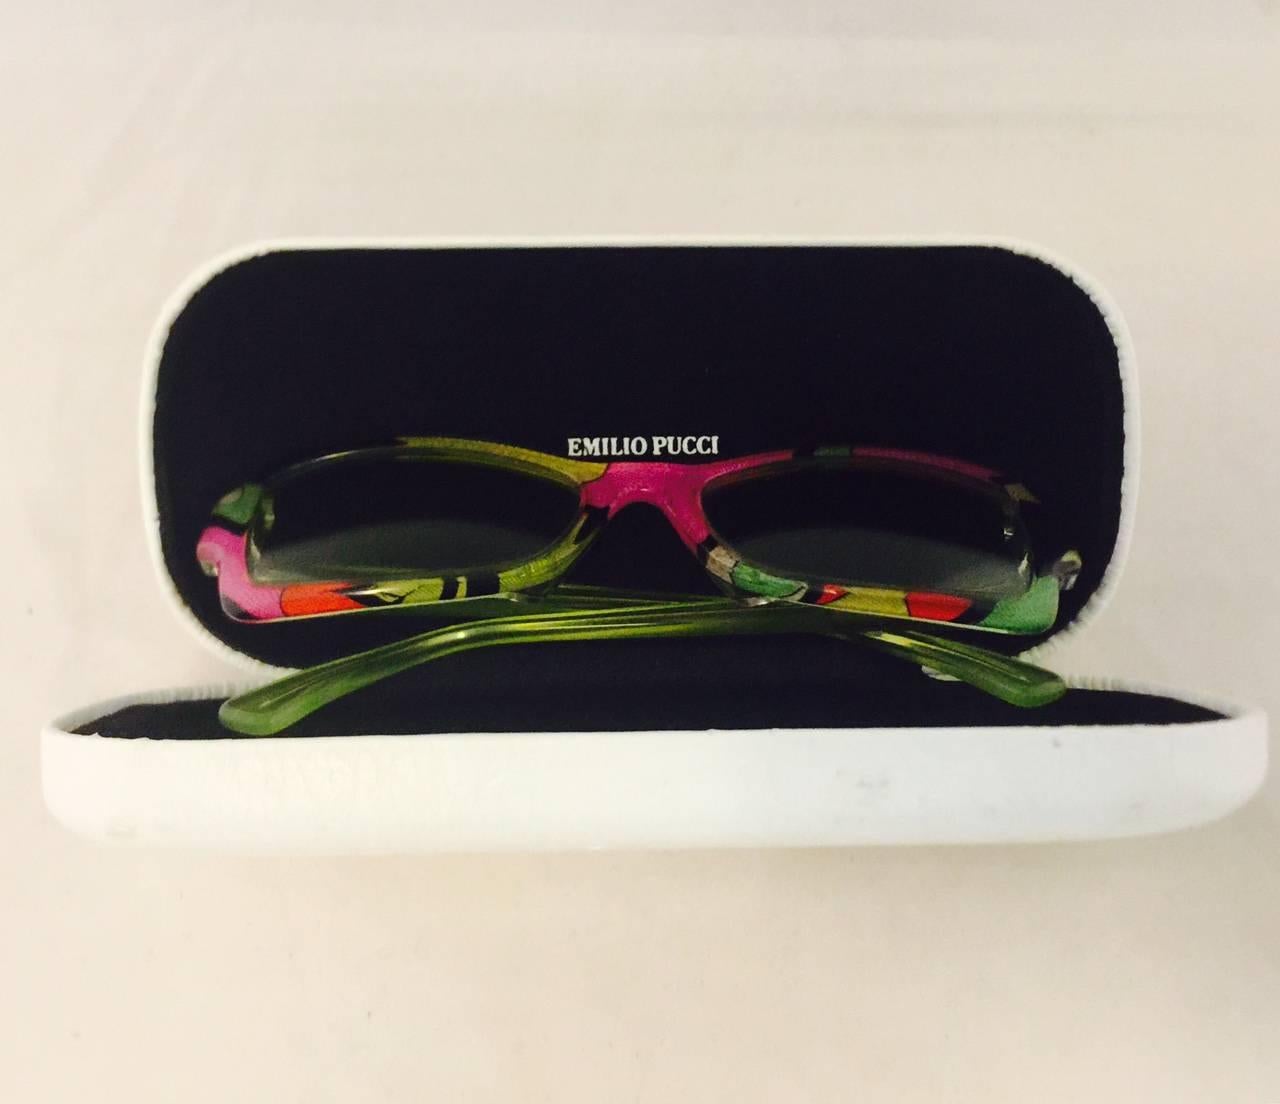 Vintage1960s Emilio Pucci Sunglasses with Iconic Print in Green, Pink & Orange 1